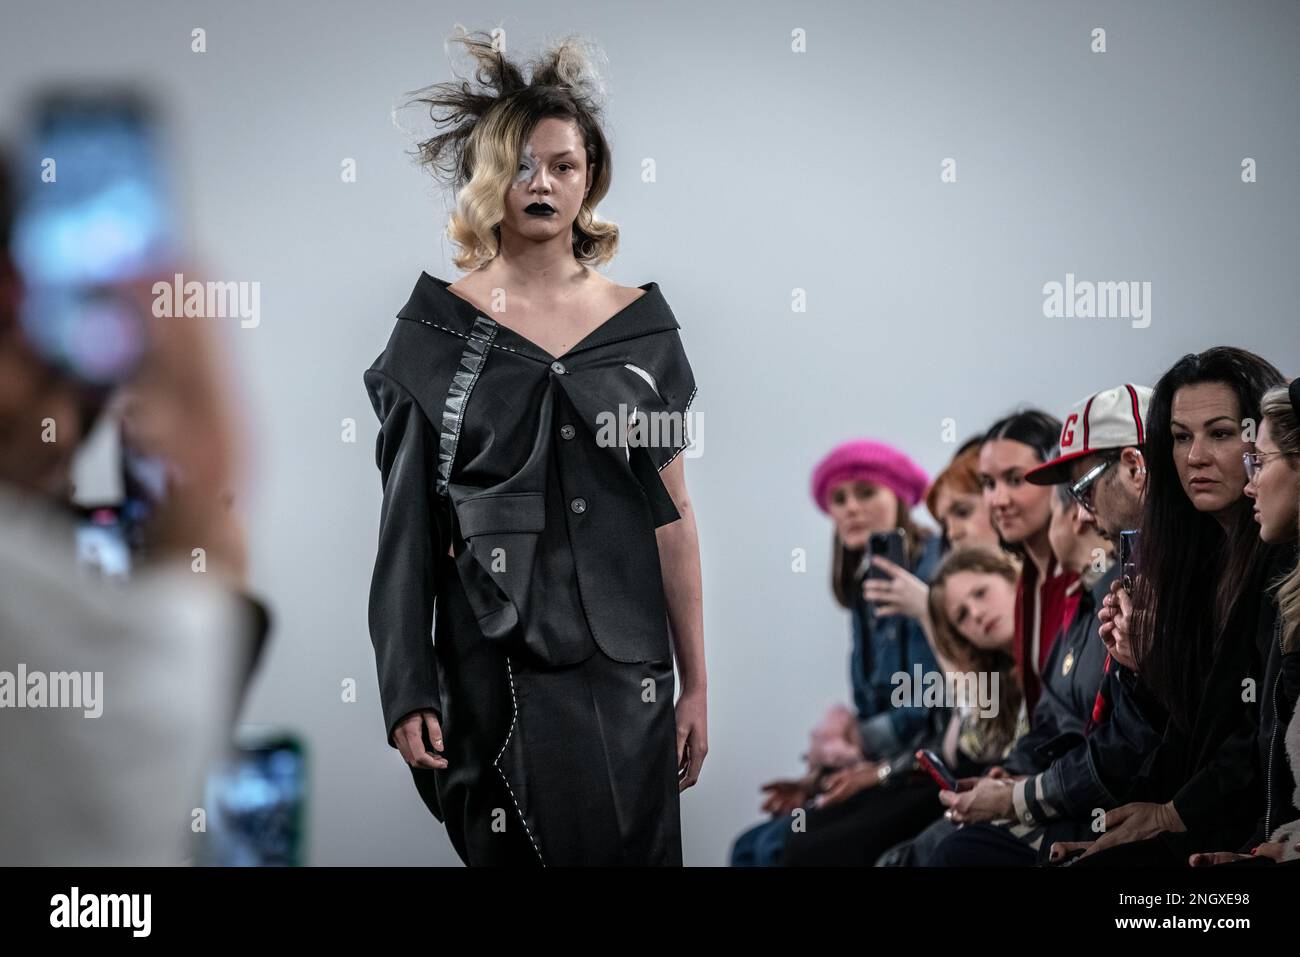 https://c8.alamy.com/comp/2NGXE98/london-uk-18th-february-2023-london-fashion-week-ia-london-presents-asymmetrix-at-protein-studios-in-shoreditch-the-runway-show-of-sustainable-ethically-produced-womenswear-holds-a-strong-artistic-brand-identity-and-is-entirely-manufactured-in-england-credit-guy-corbishleyempicsalamy-live-news-2NGXE98.jpg